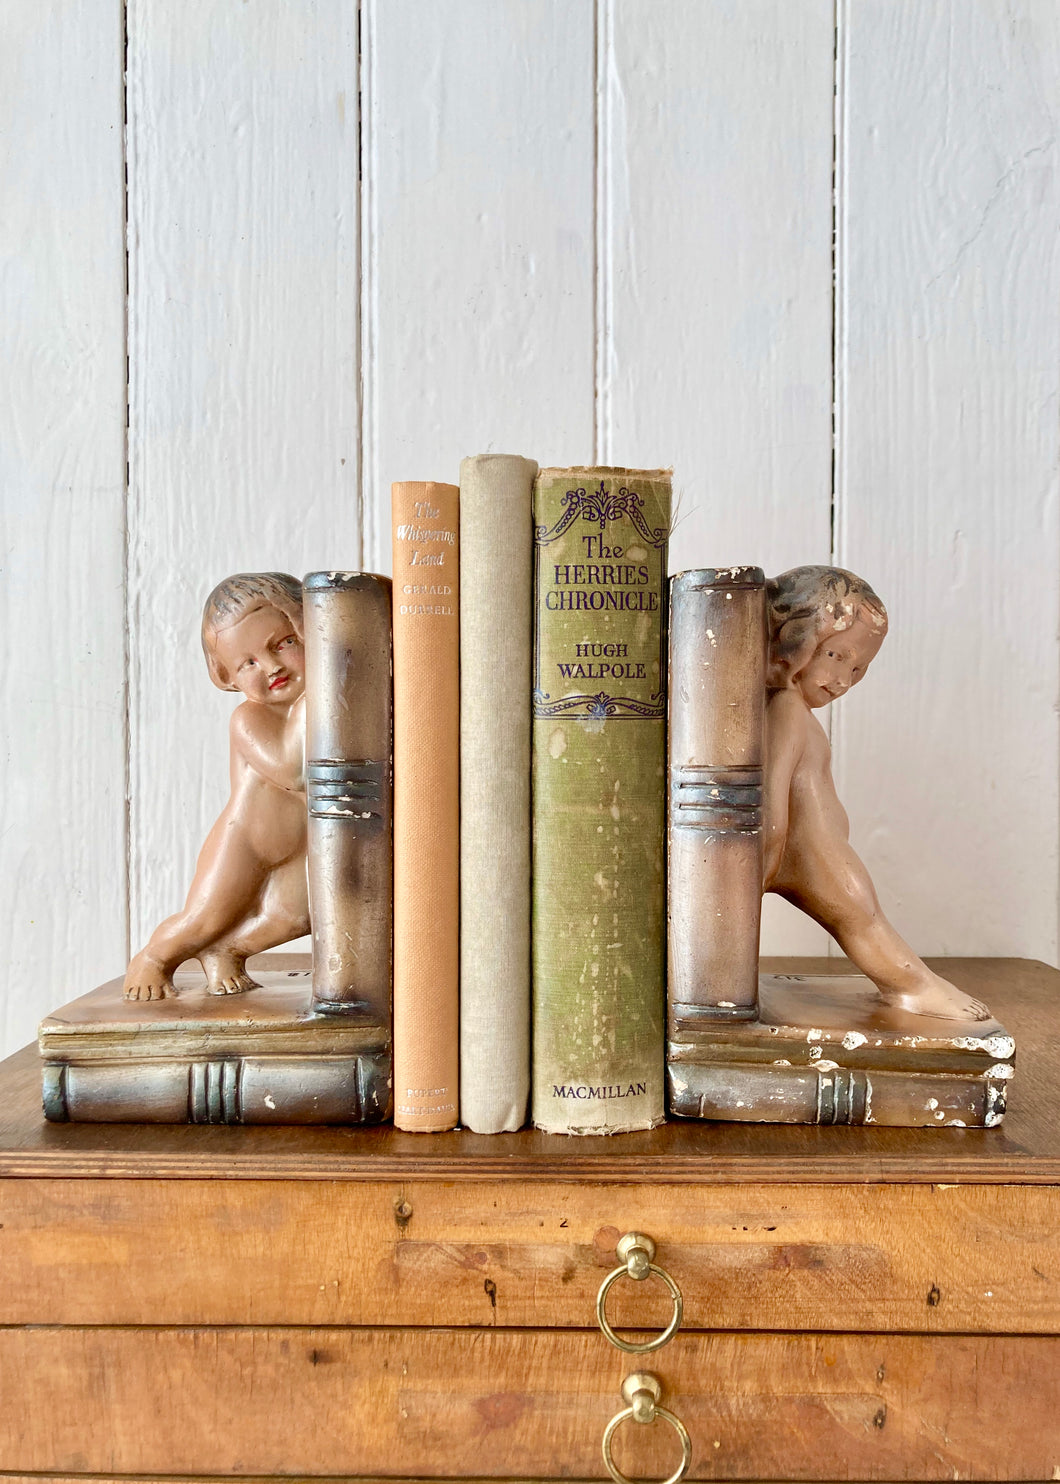 A rare pair of bronzed plaster bookends